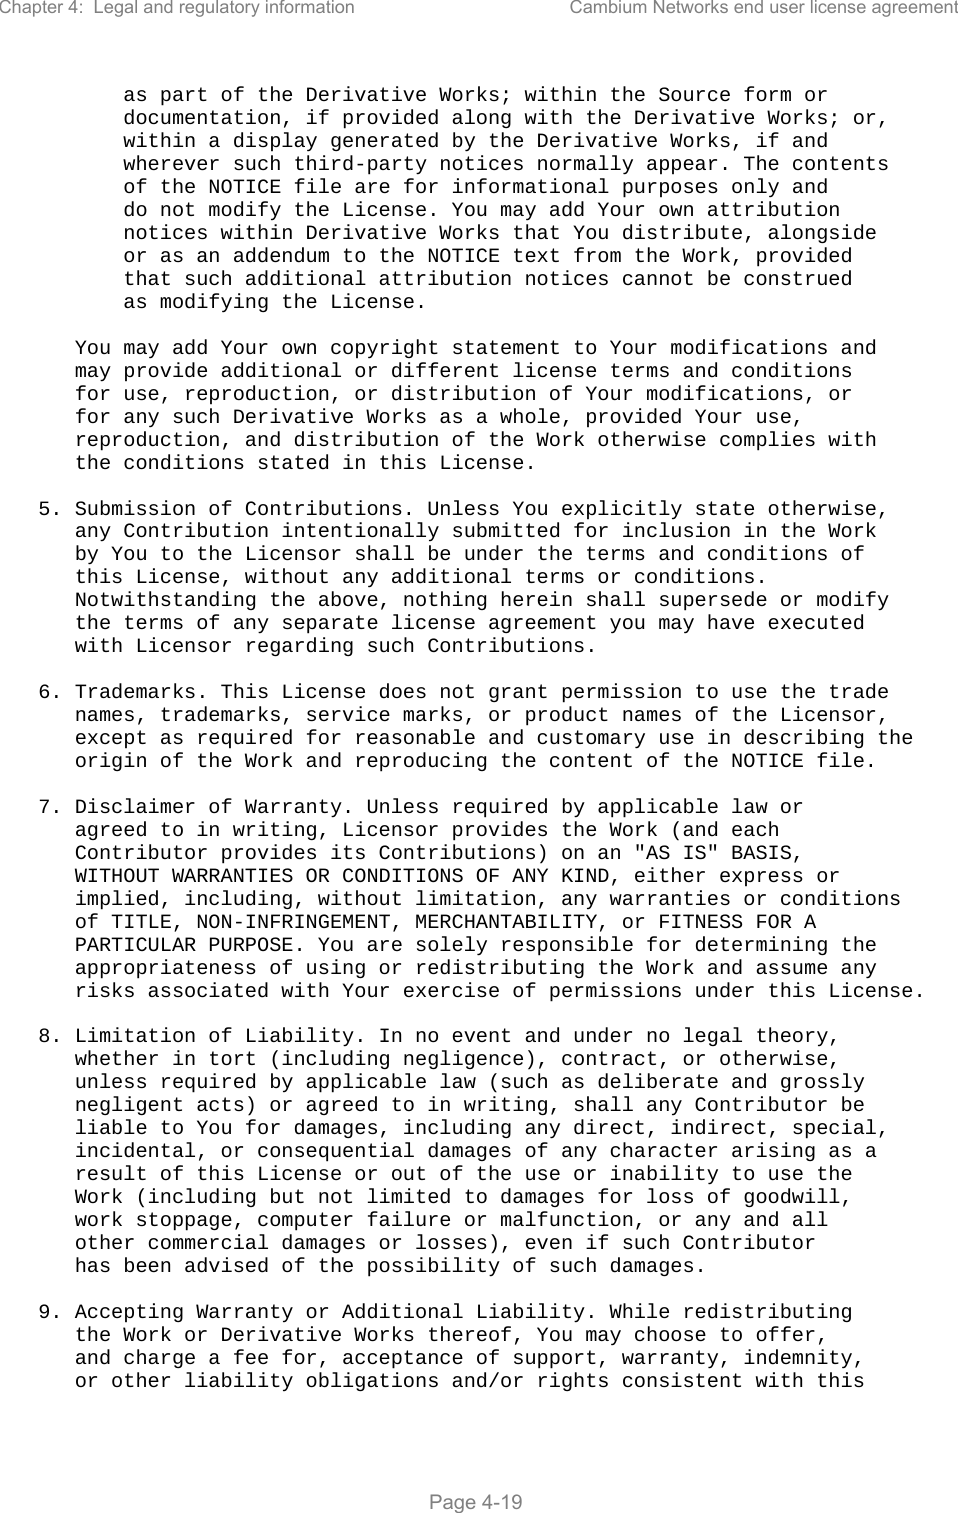 Chapter 4:  Legal and regulatory information  Cambium Networks end user license agreement   Page 4-19           as part of the Derivative Works; within the Source form or           documentation, if provided along with the Derivative Works; or,           within a display generated by the Derivative Works, if and           wherever such third-party notices normally appear. The contents           of the NOTICE file are for informational purposes only and           do not modify the License. You may add Your own attribution           notices within Derivative Works that You distribute, alongside           or as an addendum to the NOTICE text from the Work, provided           that such additional attribution notices cannot be construed           as modifying the License.        You may add Your own copyright statement to Your modifications and       may provide additional or different license terms and conditions       for use, reproduction, or distribution of Your modifications, or       for any such Derivative Works as a whole, provided Your use,       reproduction, and distribution of the Work otherwise complies with       the conditions stated in this License.     5. Submission of Contributions. Unless You explicitly state otherwise,       any Contribution intentionally submitted for inclusion in the Work       by You to the Licensor shall be under the terms and conditions of       this License, without any additional terms or conditions.       Notwithstanding the above, nothing herein shall supersede or modify       the terms of any separate license agreement you may have executed       with Licensor regarding such Contributions.     6. Trademarks. This License does not grant permission to use the trade       names, trademarks, service marks, or product names of the Licensor,       except as required for reasonable and customary use in describing the       origin of the Work and reproducing the content of the NOTICE file.     7. Disclaimer of Warranty. Unless required by applicable law or       agreed to in writing, Licensor provides the Work (and each       Contributor provides its Contributions) on an &quot;AS IS&quot; BASIS,       WITHOUT WARRANTIES OR CONDITIONS OF ANY KIND, either express or       implied, including, without limitation, any warranties or conditions       of TITLE, NON-INFRINGEMENT, MERCHANTABILITY, or FITNESS FOR A       PARTICULAR PURPOSE. You are solely responsible for determining the       appropriateness of using or redistributing the Work and assume any       risks associated with Your exercise of permissions under this License.     8. Limitation of Liability. In no event and under no legal theory,       whether in tort (including negligence), contract, or otherwise,       unless required by applicable law (such as deliberate and grossly       negligent acts) or agreed to in writing, shall any Contributor be       liable to You for damages, including any direct, indirect, special,       incidental, or consequential damages of any character arising as a       result of this License or out of the use or inability to use the       Work (including but not limited to damages for loss of goodwill,       work stoppage, computer failure or malfunction, or any and all       other commercial damages or losses), even if such Contributor       has been advised of the possibility of such damages.     9. Accepting Warranty or Additional Liability. While redistributing       the Work or Derivative Works thereof, You may choose to offer,       and charge a fee for, acceptance of support, warranty, indemnity,       or other liability obligations and/or rights consistent with this 